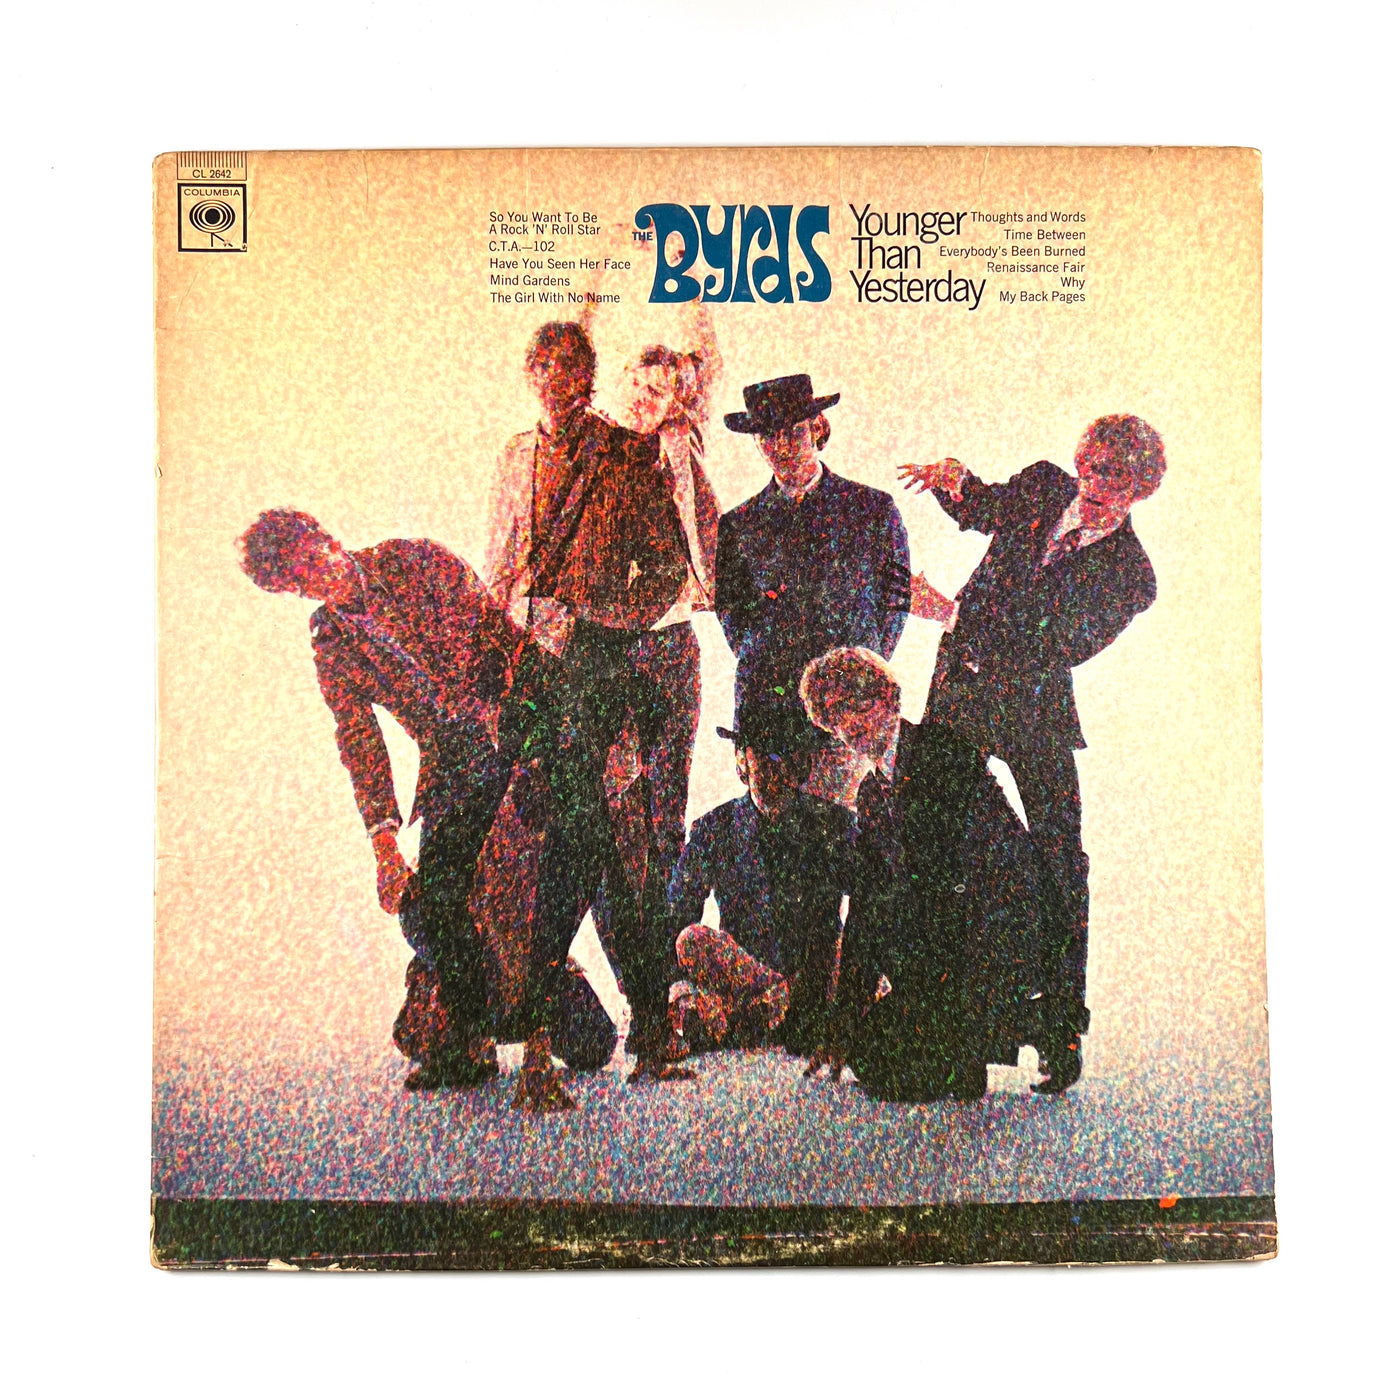 The Byrds - Younger Than Yesterday - 1967 Mono Press